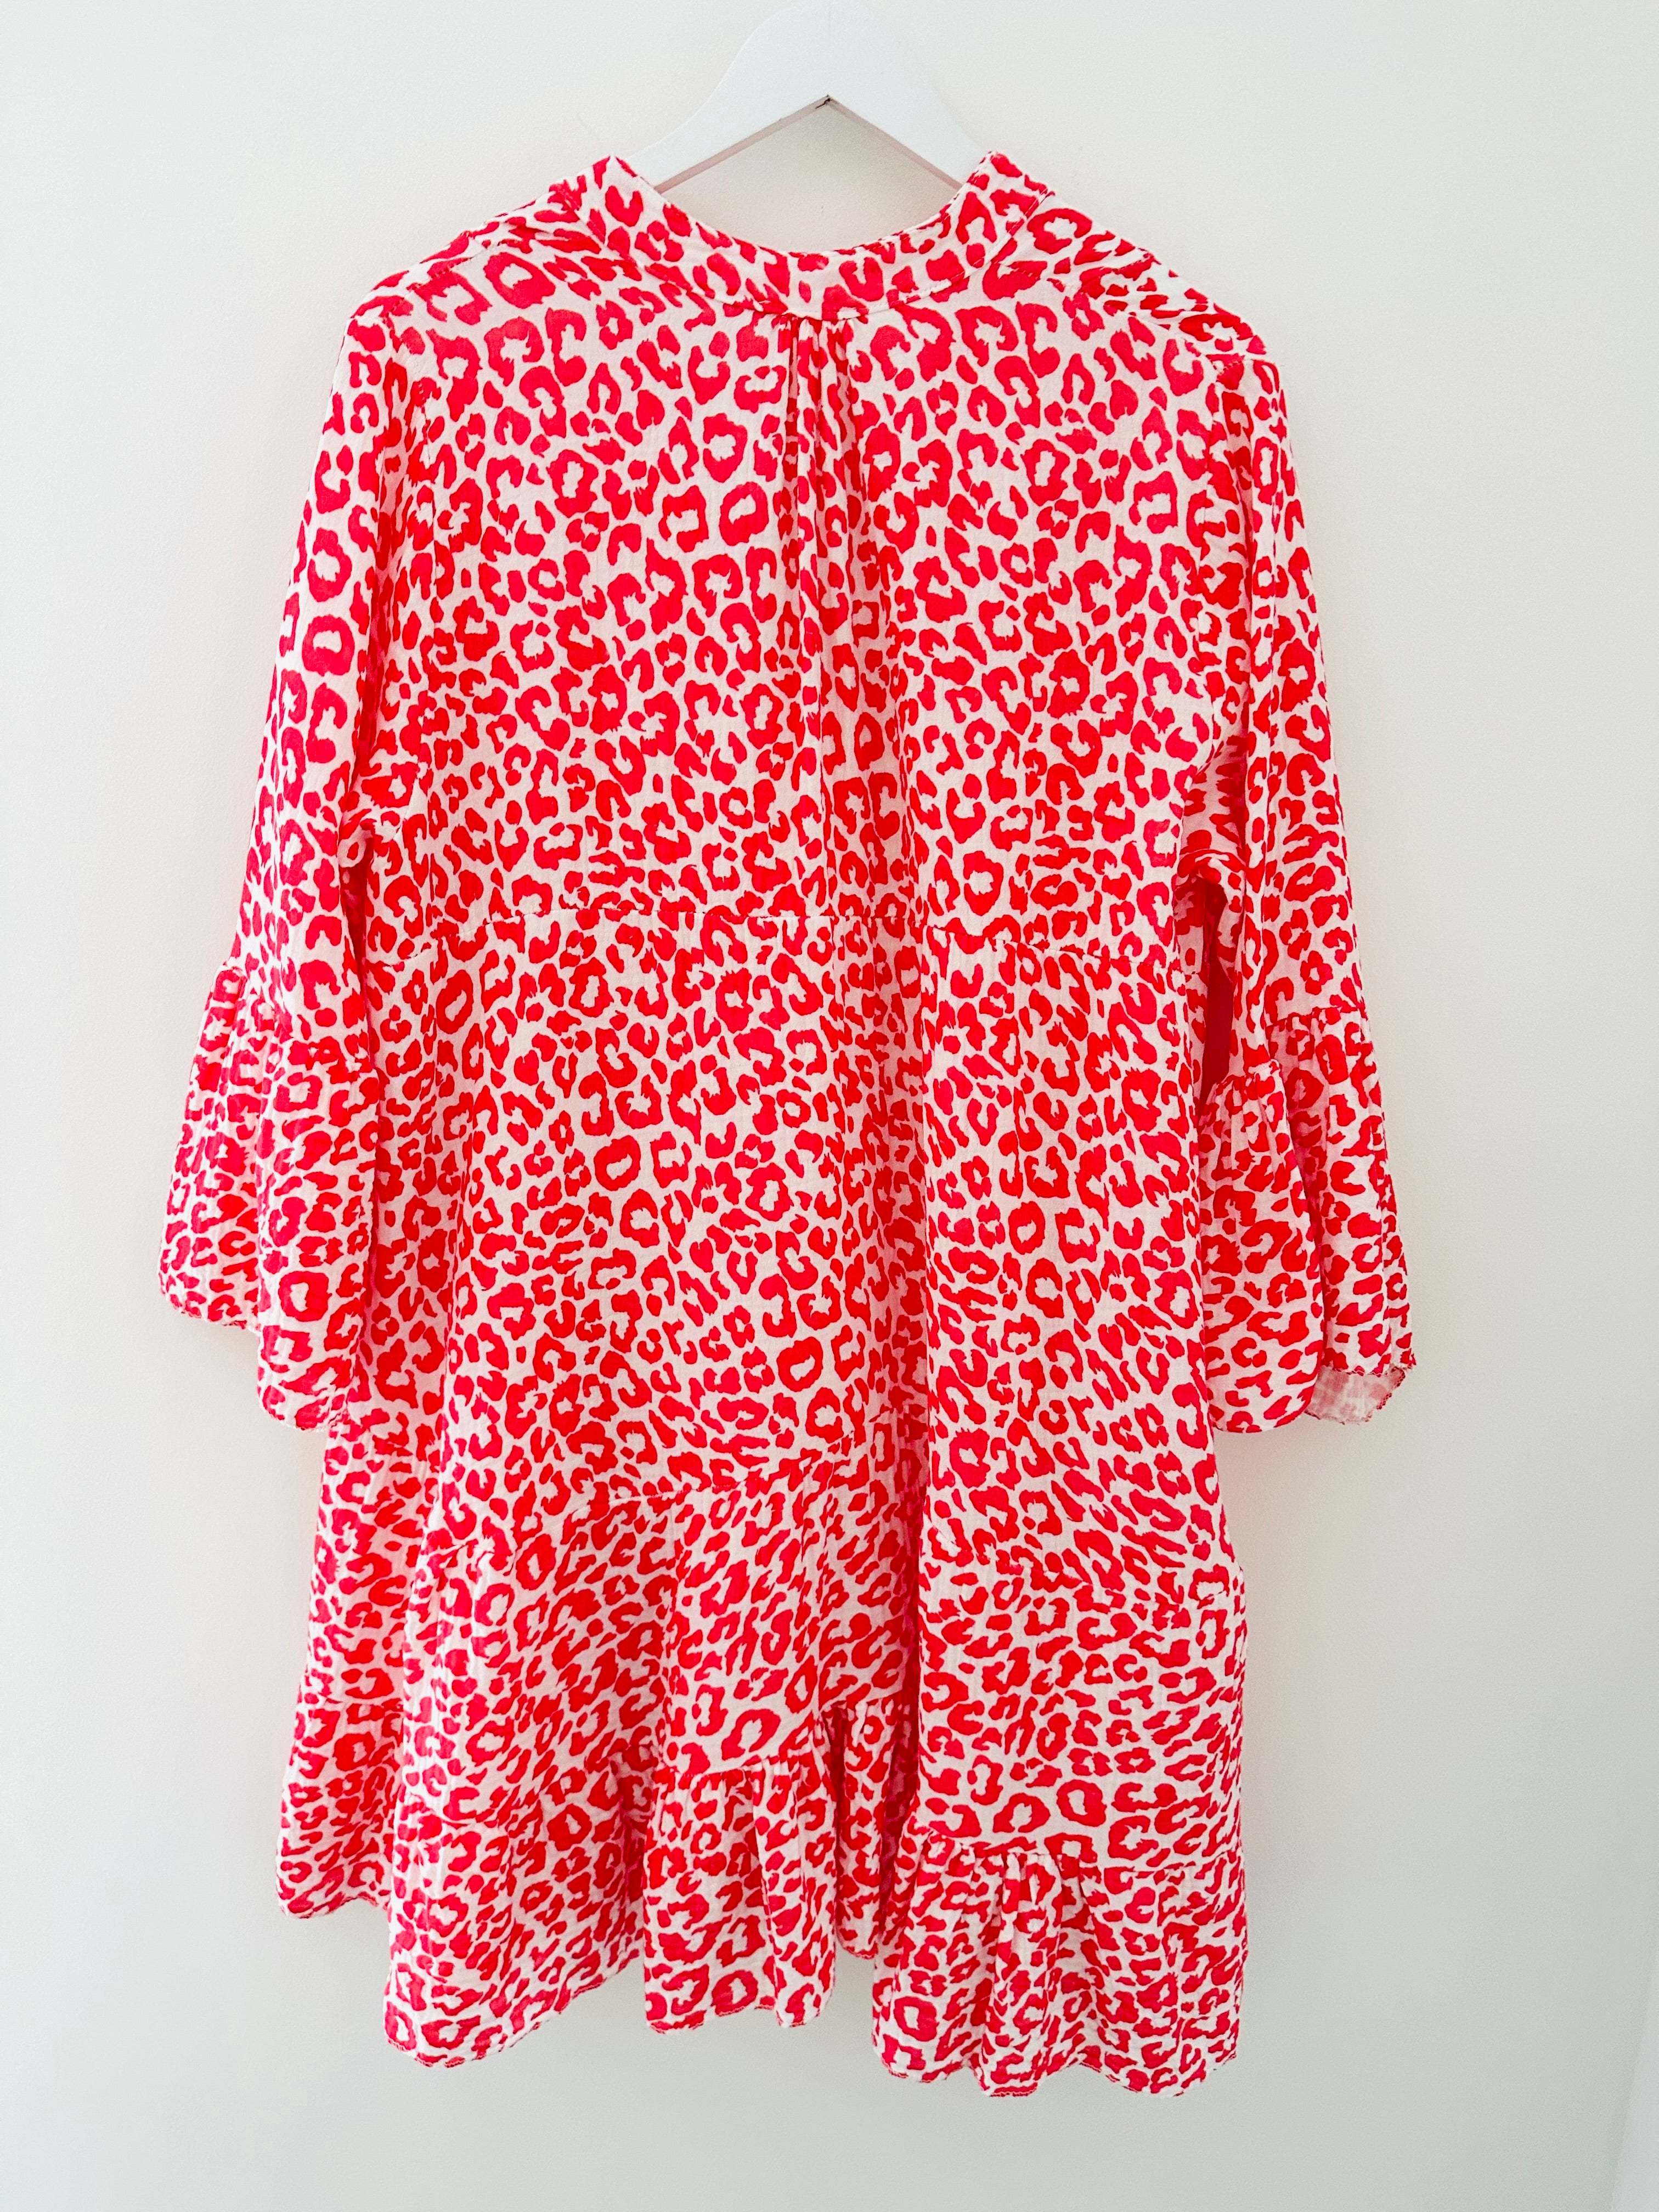 Cheesecloth Print Dress in Bright Red & White